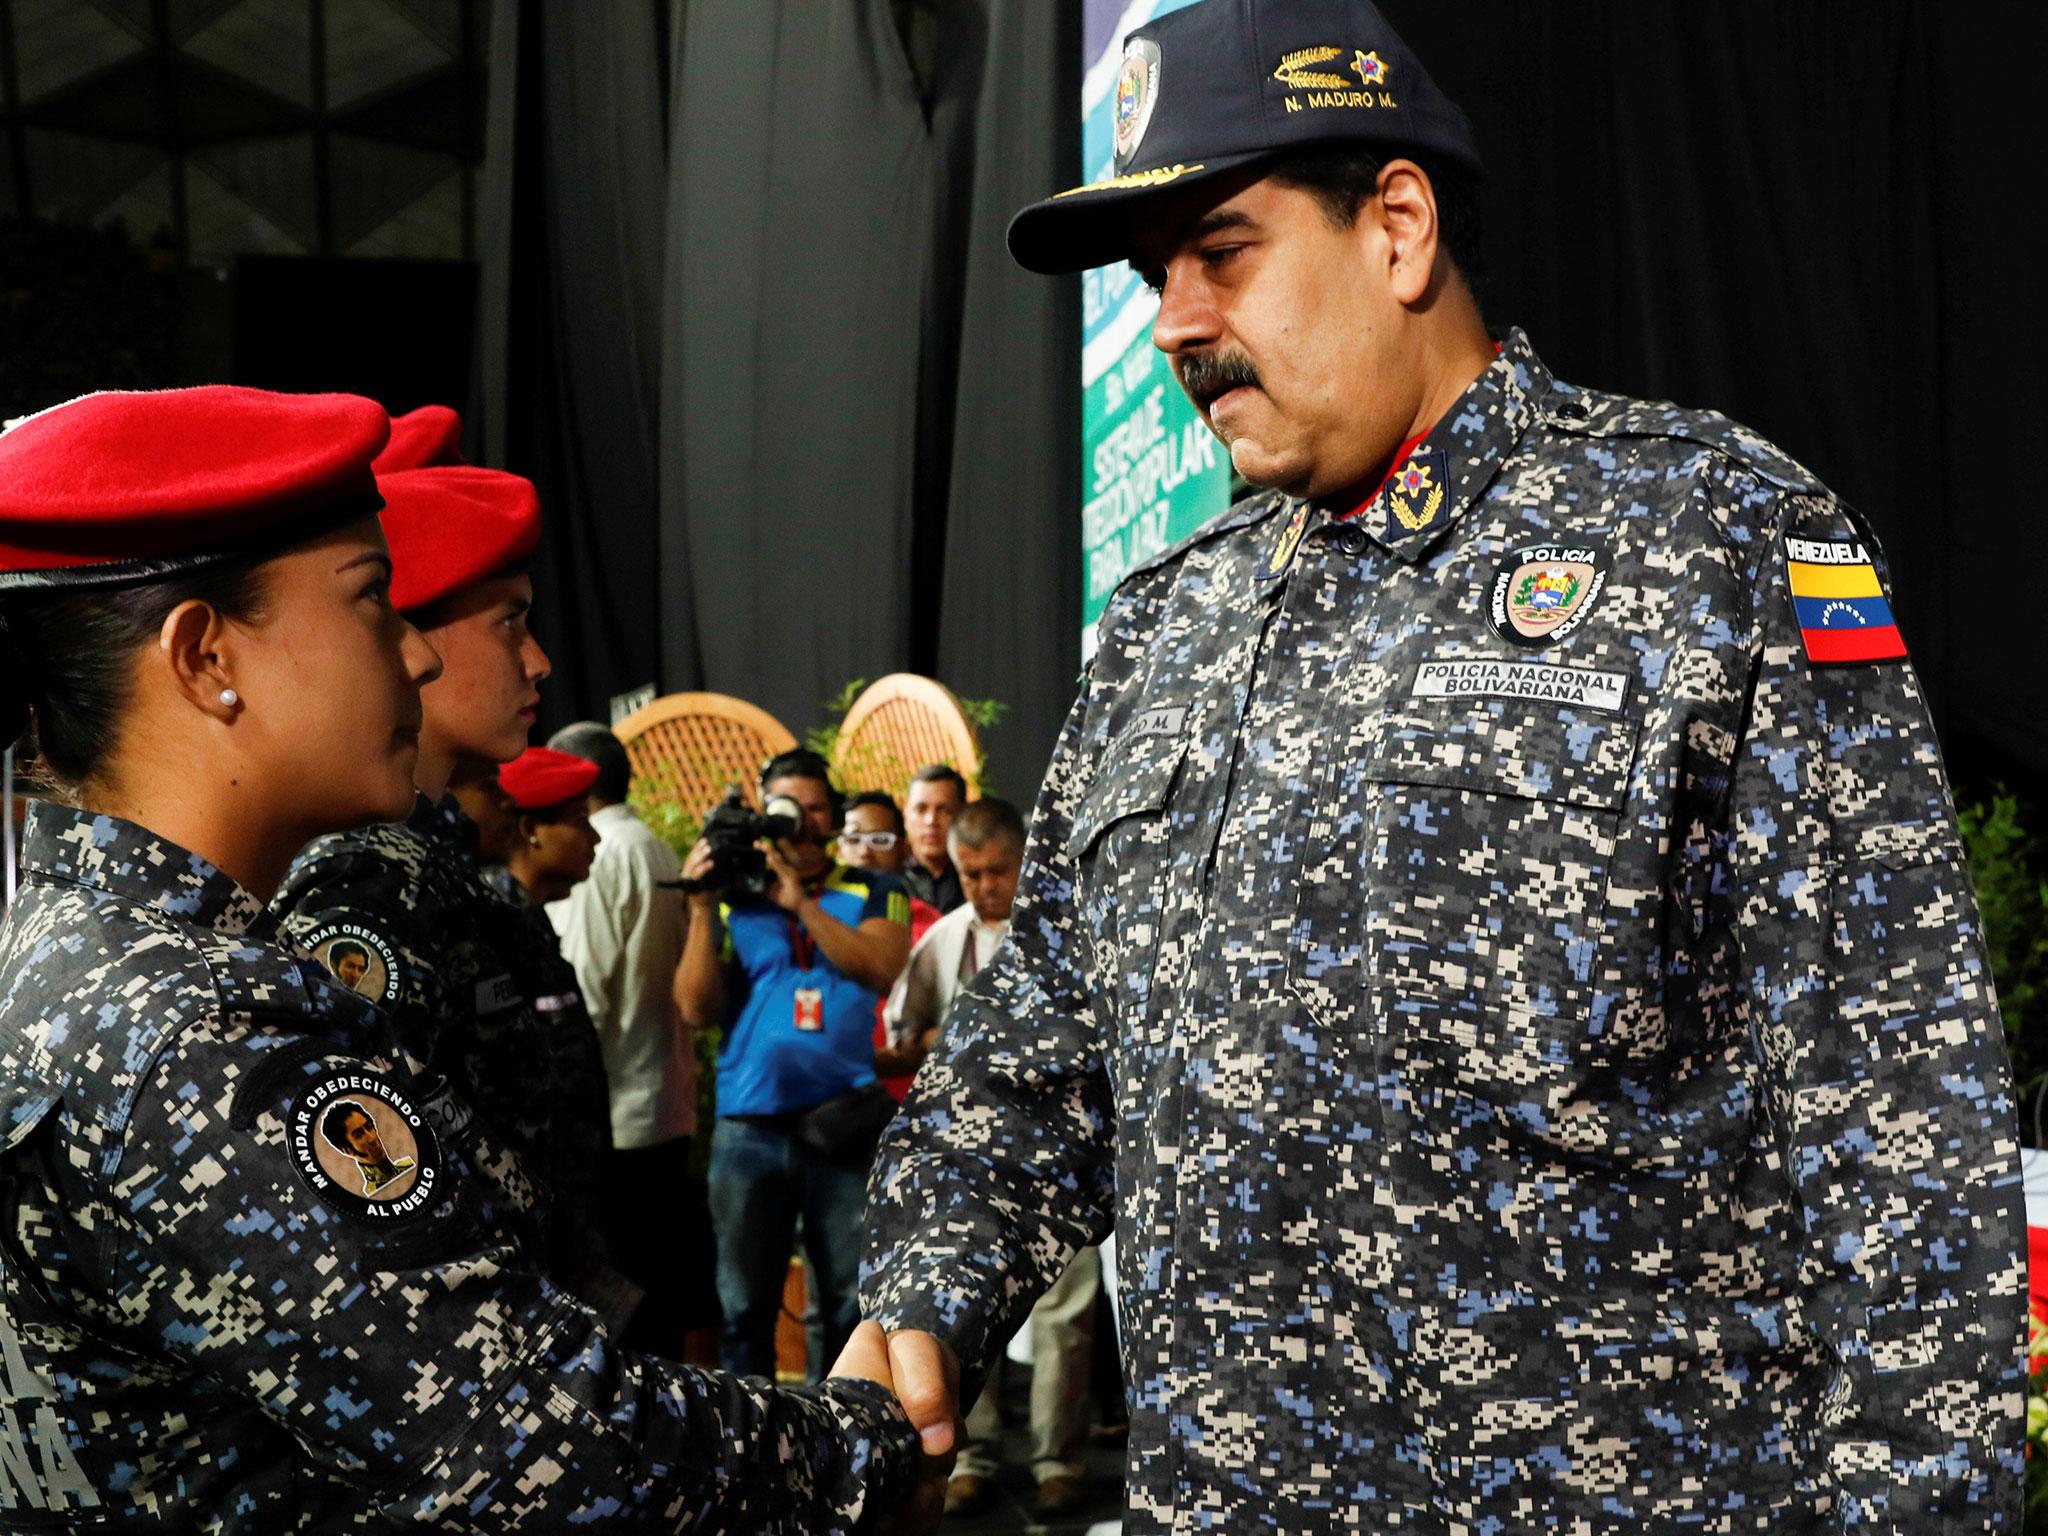 President Nicolas Maduro is expected to run for re-election despite the disastrous state of the country's economy